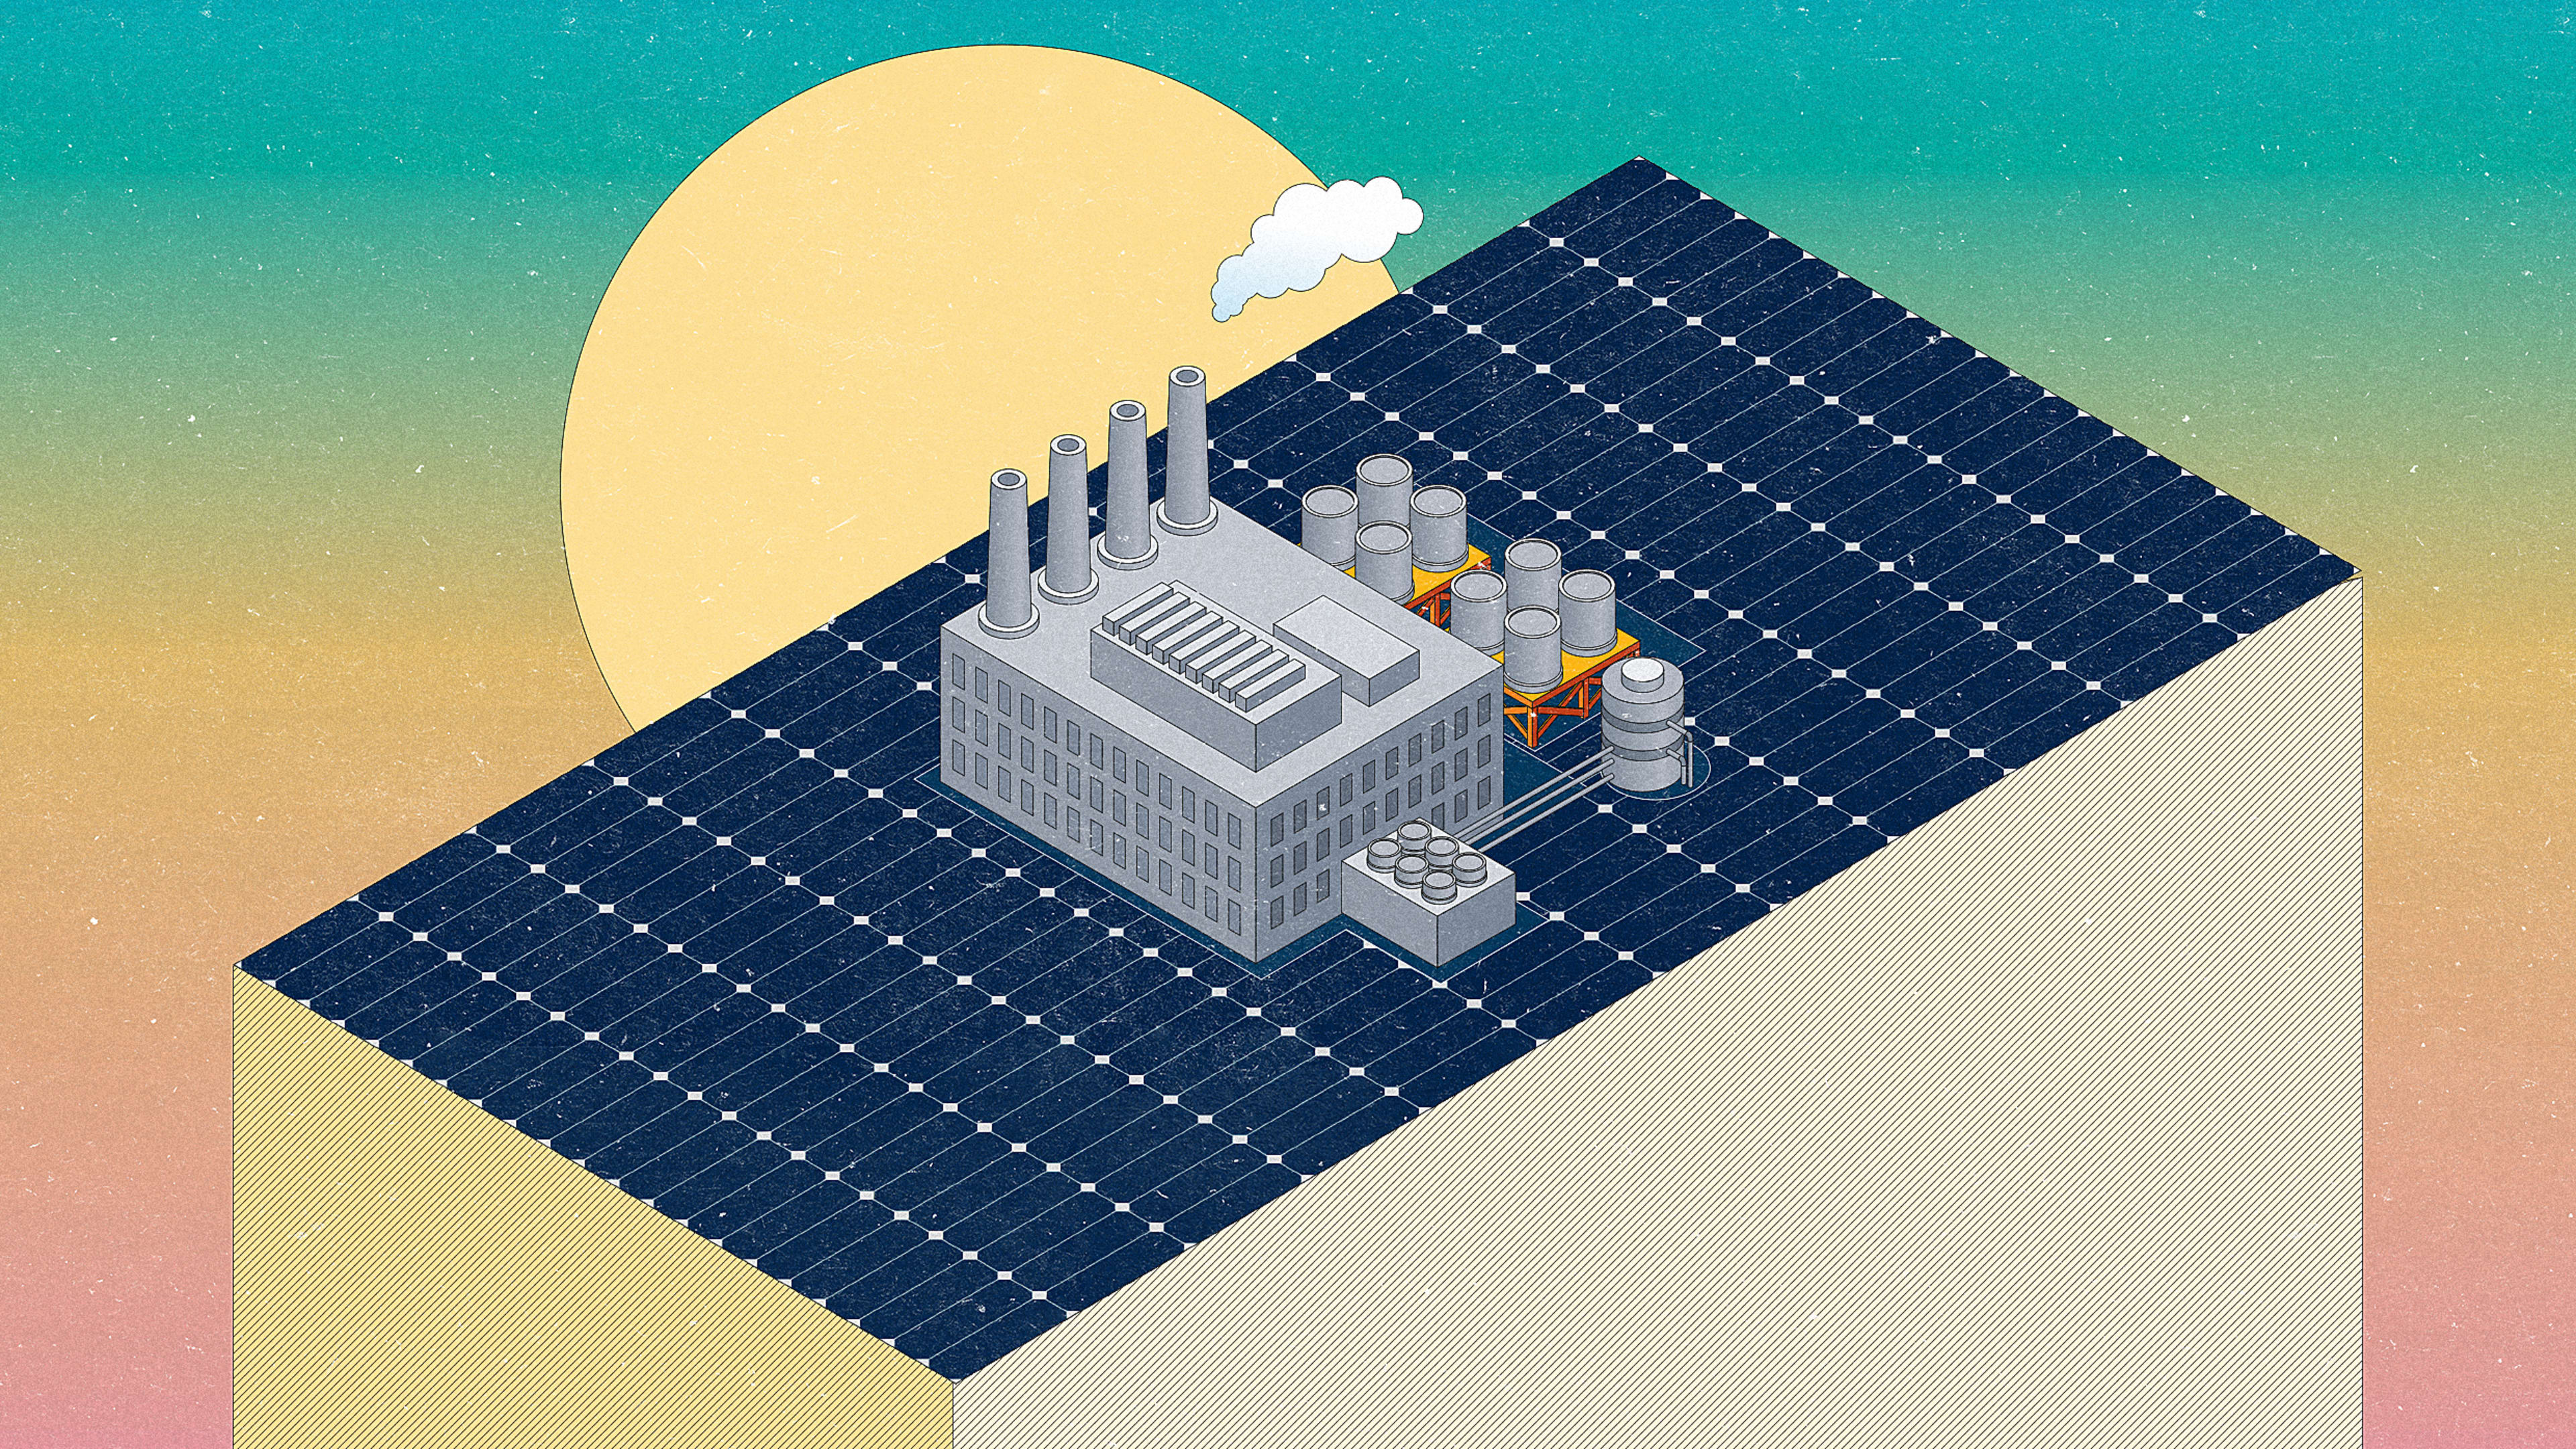 For decades, these power plants ran on coal. Now, they’re converting to clean energy